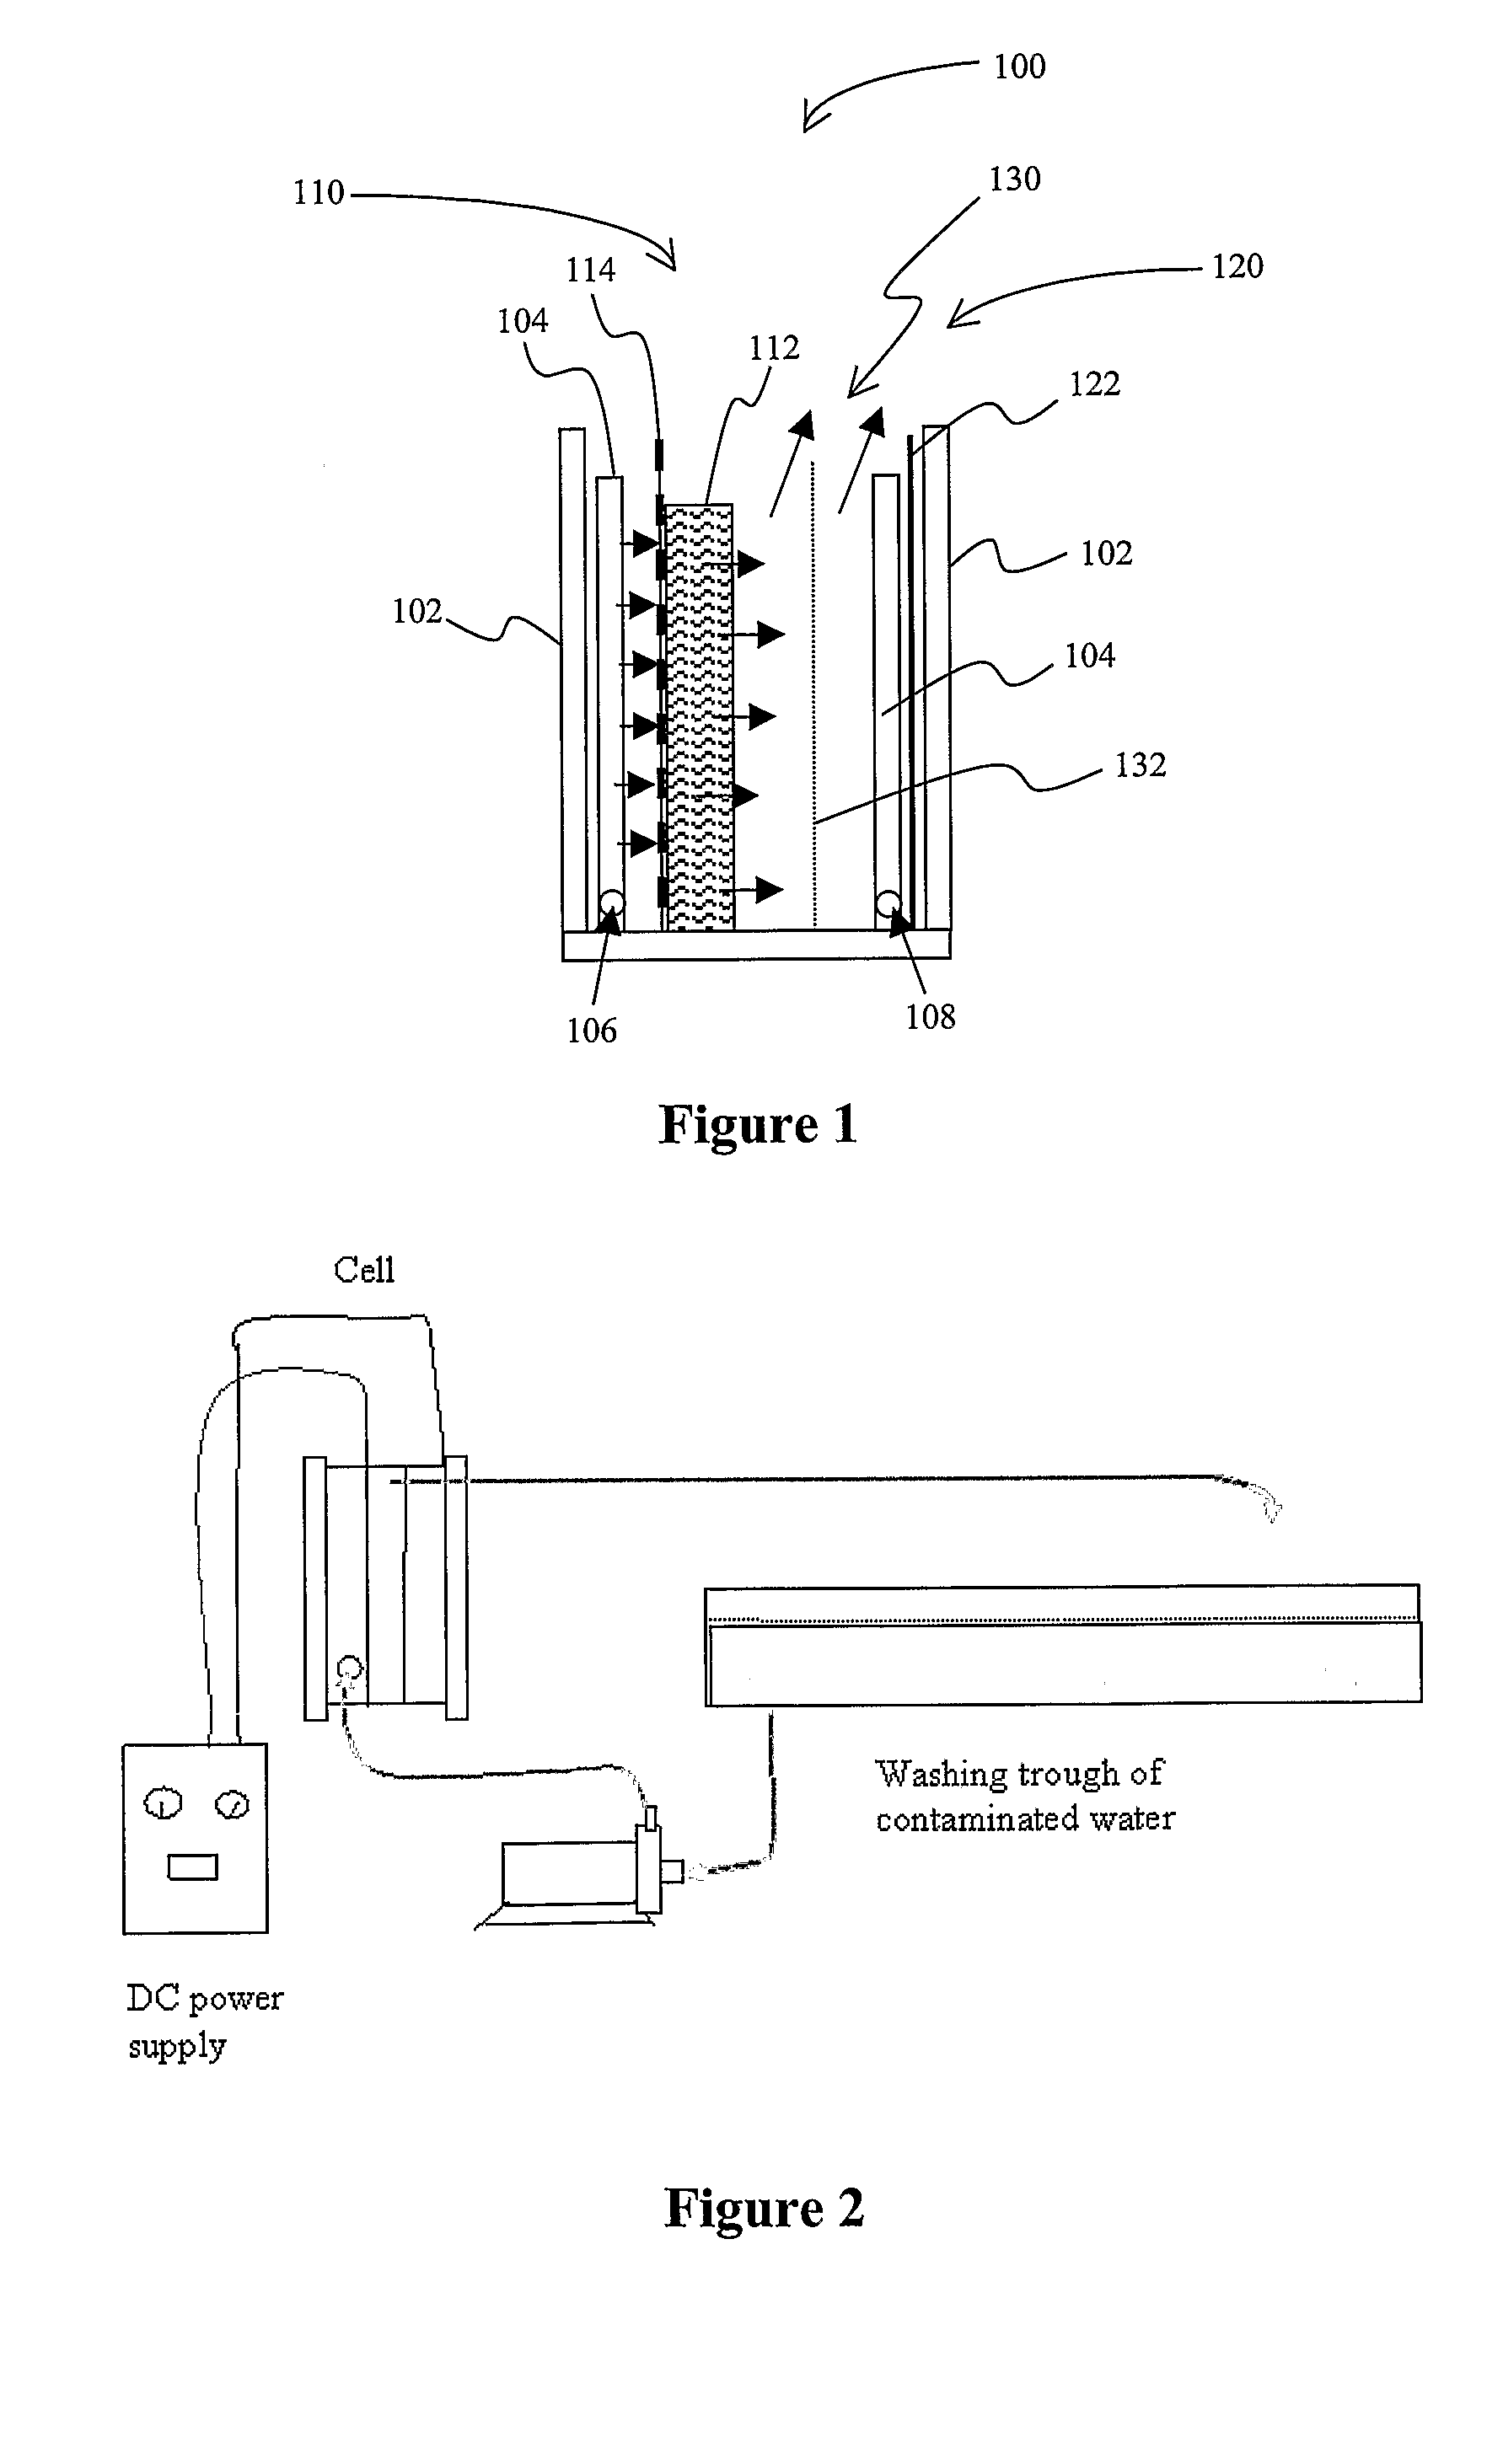 Methods and Apparatus for Generating Oxidizing Agents